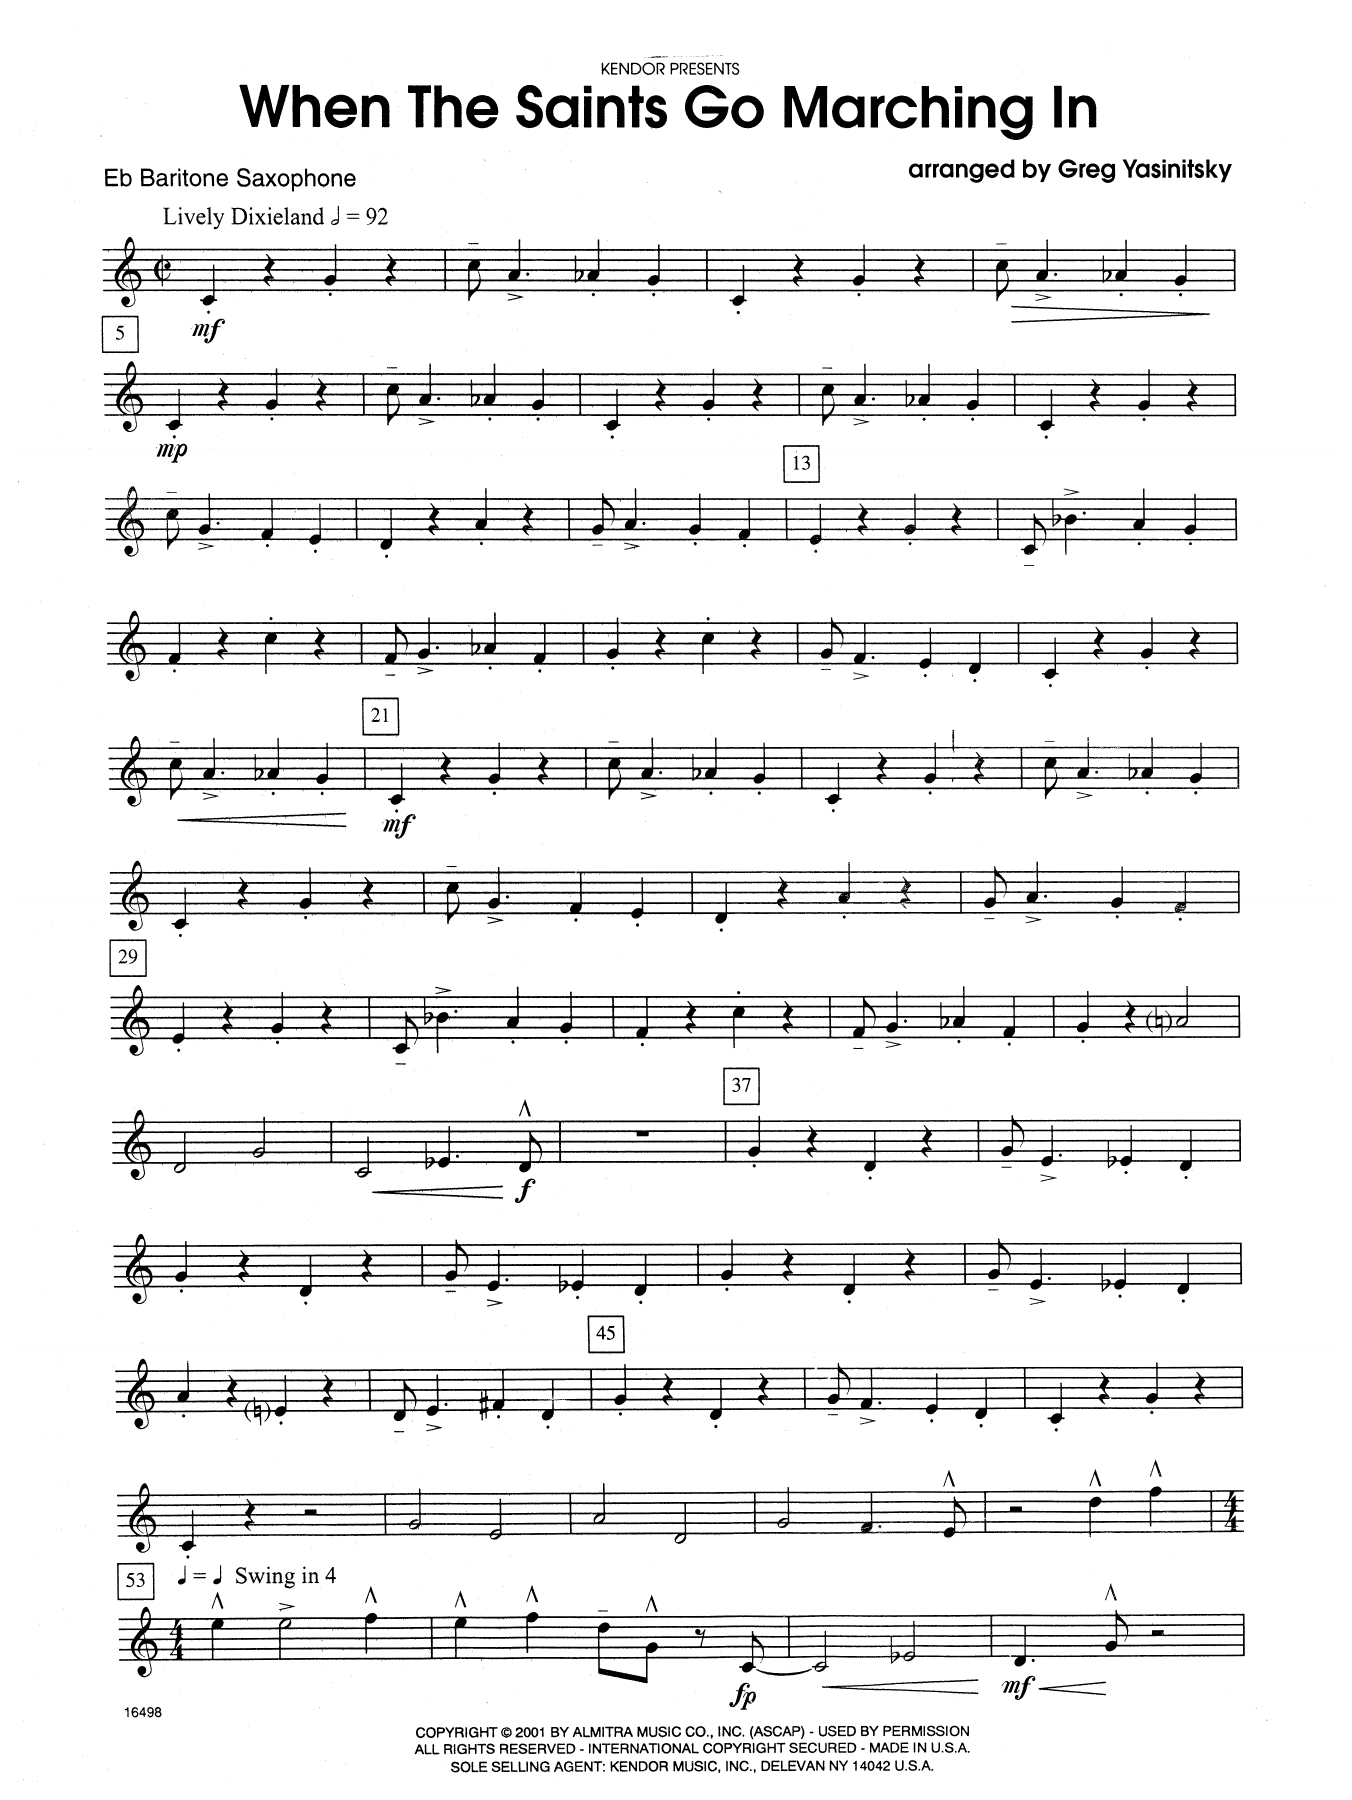 Download Gregory Yasinitsky When the Saints Go Marching In - Eb Bar Sheet Music